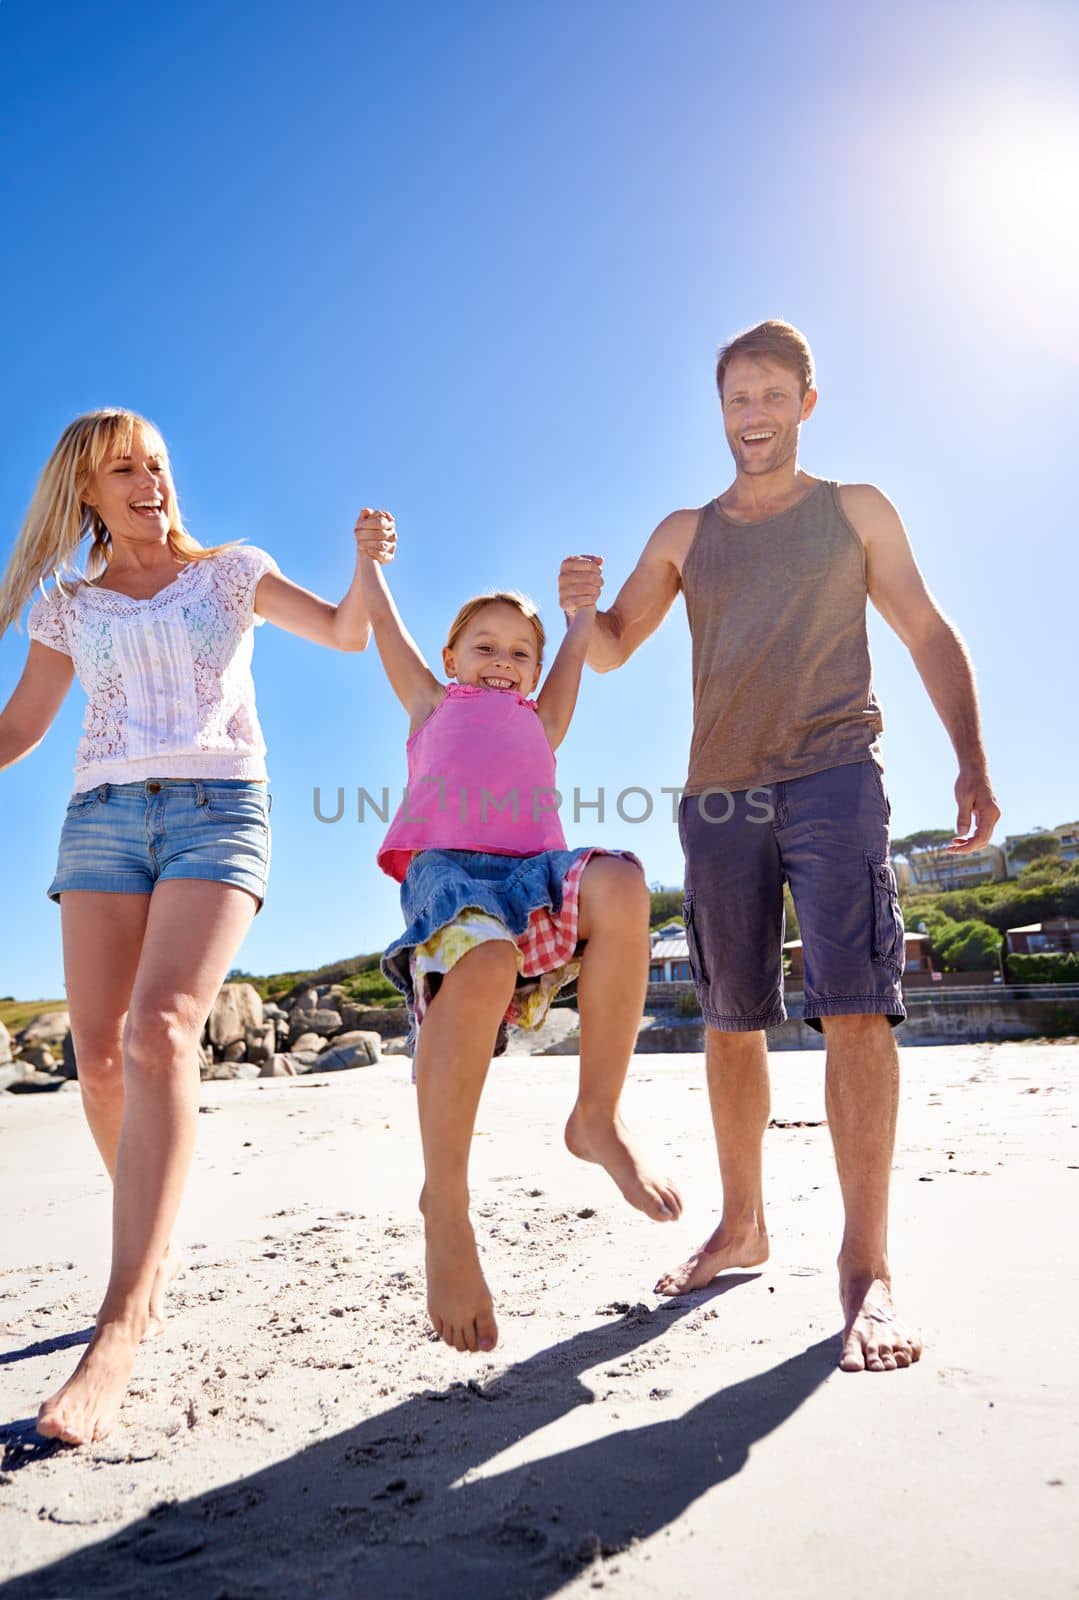 The beach is a great place for family bonding. a happy young family enjoying a walk on the beach. by YuriArcurs